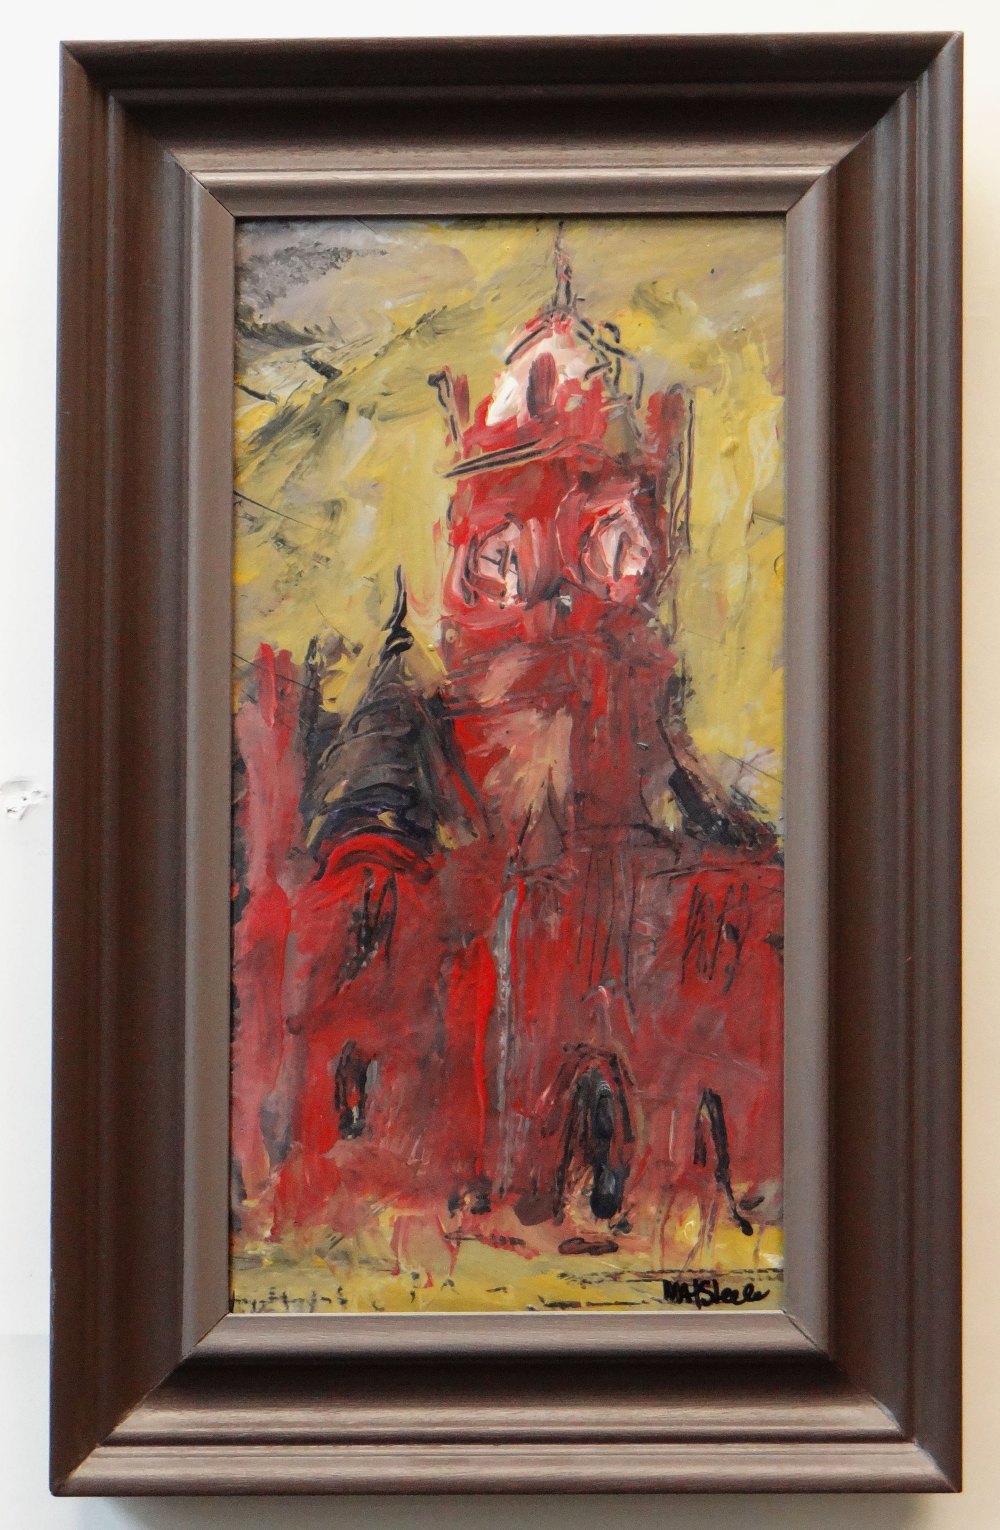 MATTHEW STEELE acrylic, charcoal and glue - the historic Pierhead Building, Cardiff, entitled verso - Image 2 of 2